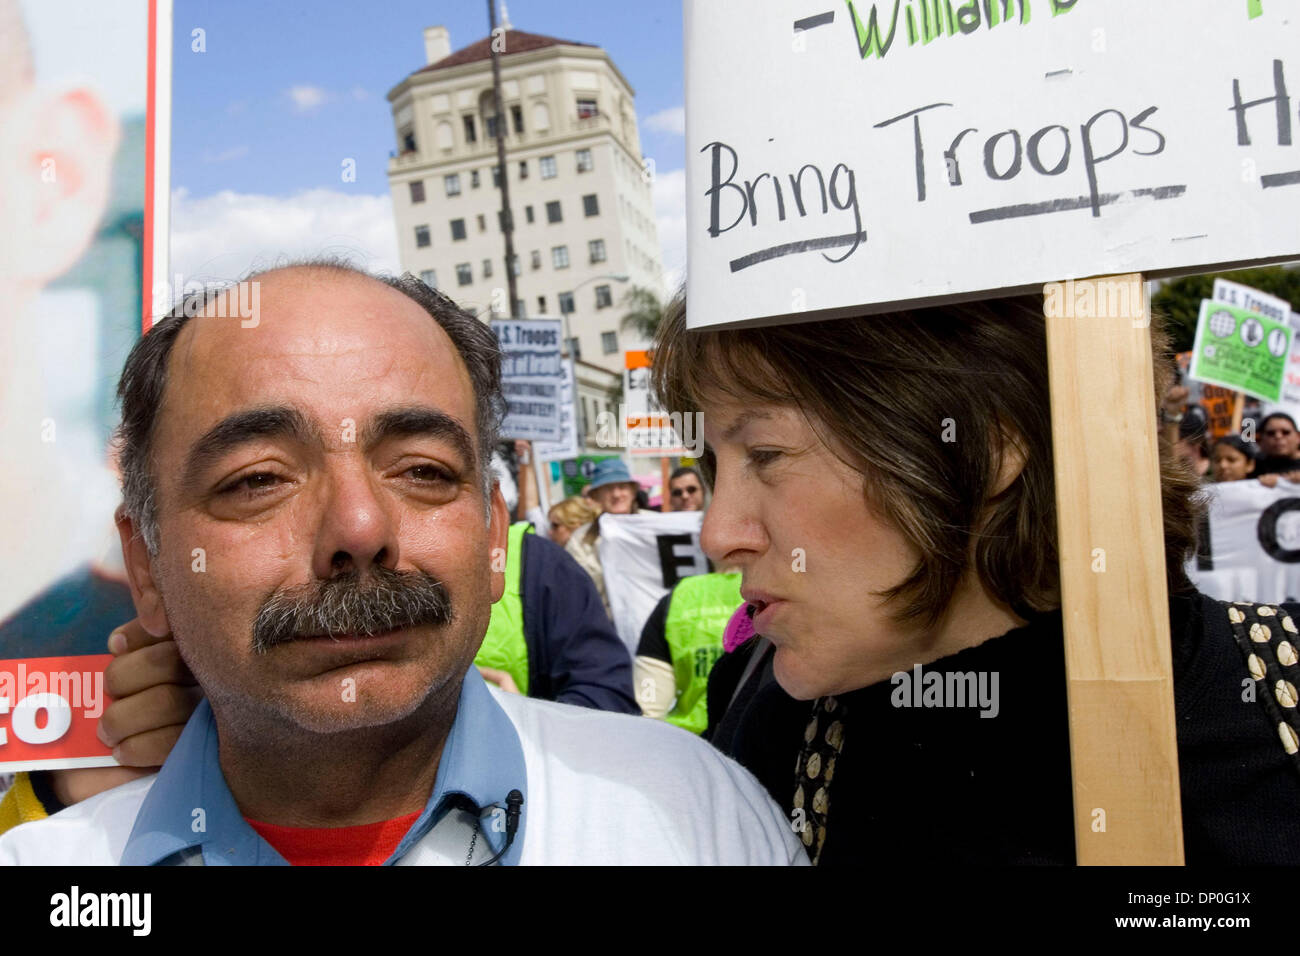 Mar 18, 2006 - Los Angeles, CA, USA - Actress MIMI KENNEDY, the co-star of Dharma and Greg, consoles FERNANDO SUAREZ DEL SOLAR at the Stop the War Protest commemorating the third anniversary of the US invasion of Iraq.  Fernando's son, Jesus Alberto Suarez del Solar was killed in Iraq in 2003 when he stepped on a cluster bomb. Ever since then, Fernando has been speaking out against Stock Photo